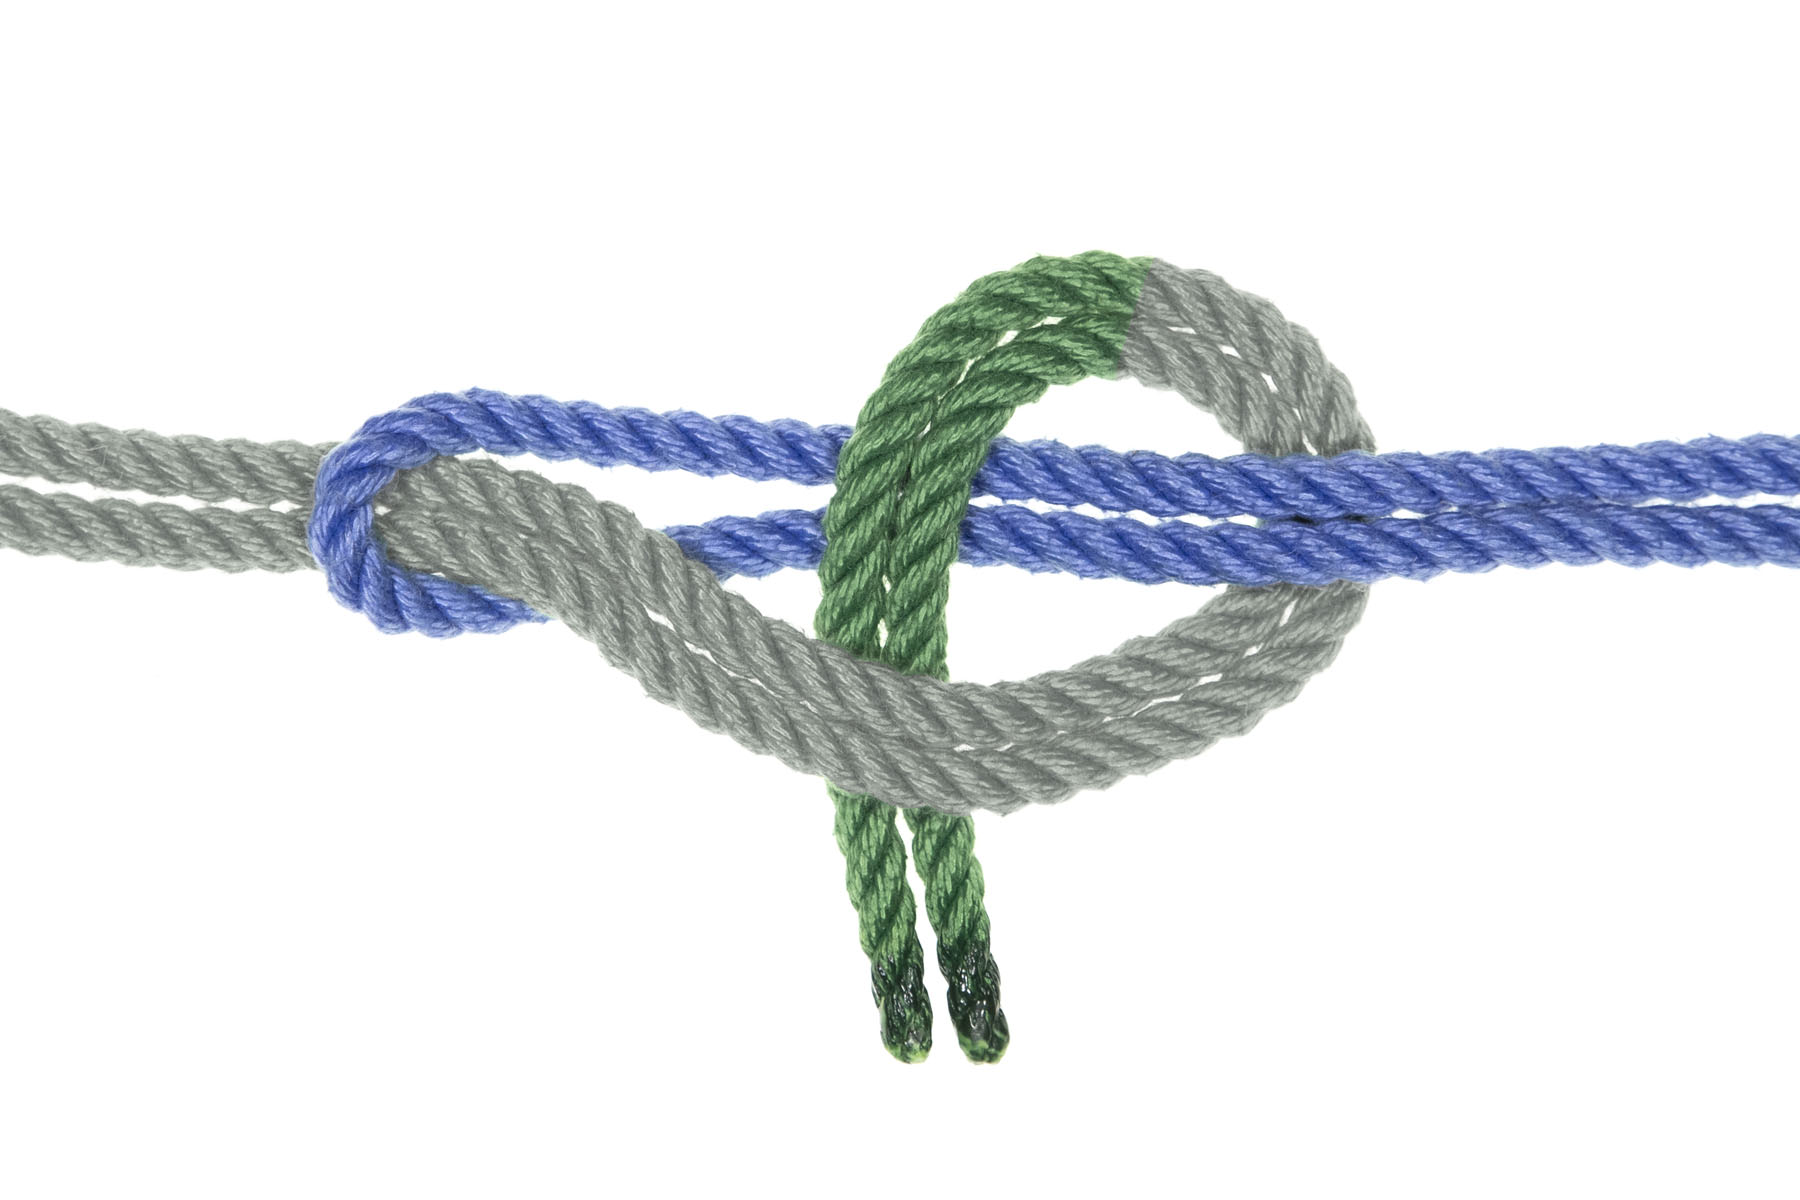 The ends of the green rope turn downward, passing over the standing part of the blue rope to the left of their previous crossing, before passing under themselves as they approach the bottom of the image.